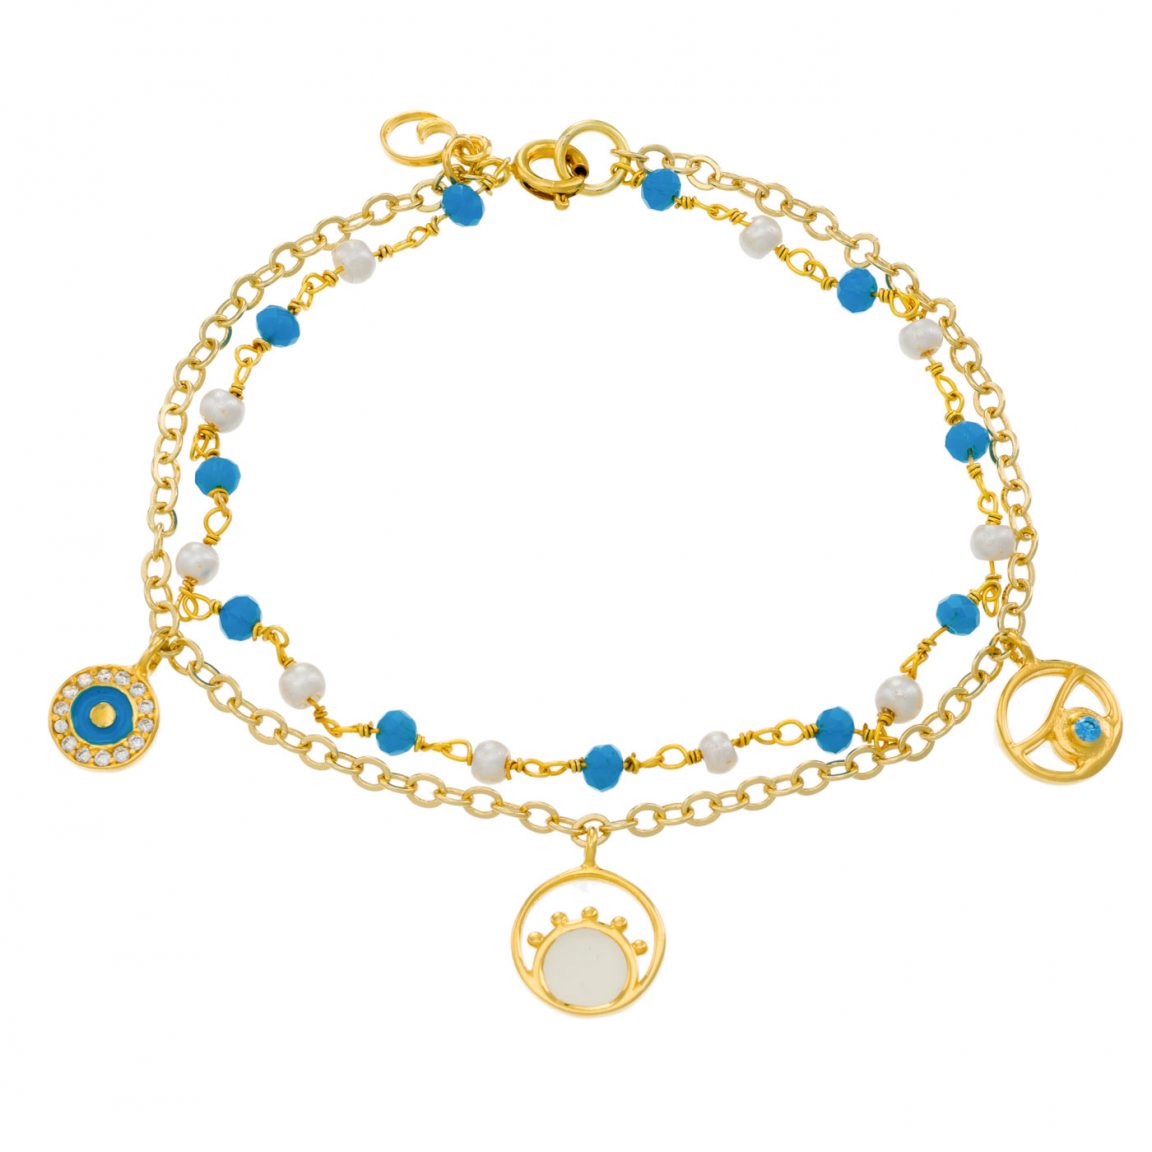 Gold-plated bracelet with eye charms